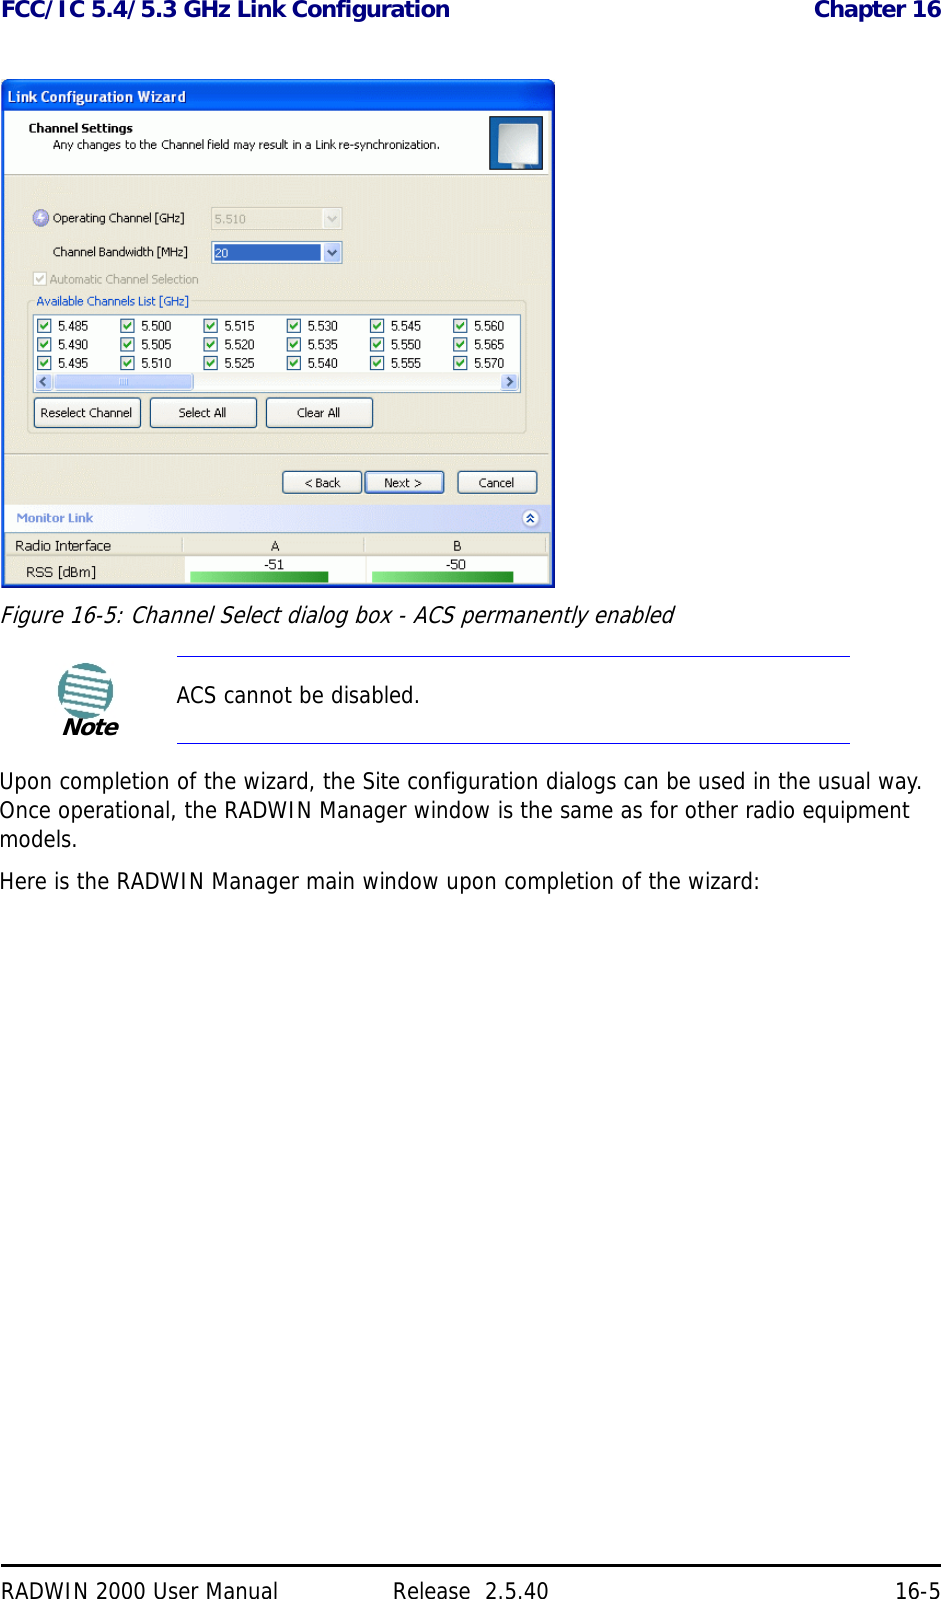 FCC/IC 5.4/5.3 GHz Link Configuration Chapter 16RADWIN 2000 User Manual Release  2.5.40 16-5Figure 16-5: Channel Select dialog box - ACS permanently enabledUpon completion of the wizard, the Site configuration dialogs can be used in the usual way. Once operational, the RADWIN Manager window is the same as for other radio equipment models.Here is the RADWIN Manager main window upon completion of the wizard:NoteACS cannot be disabled.